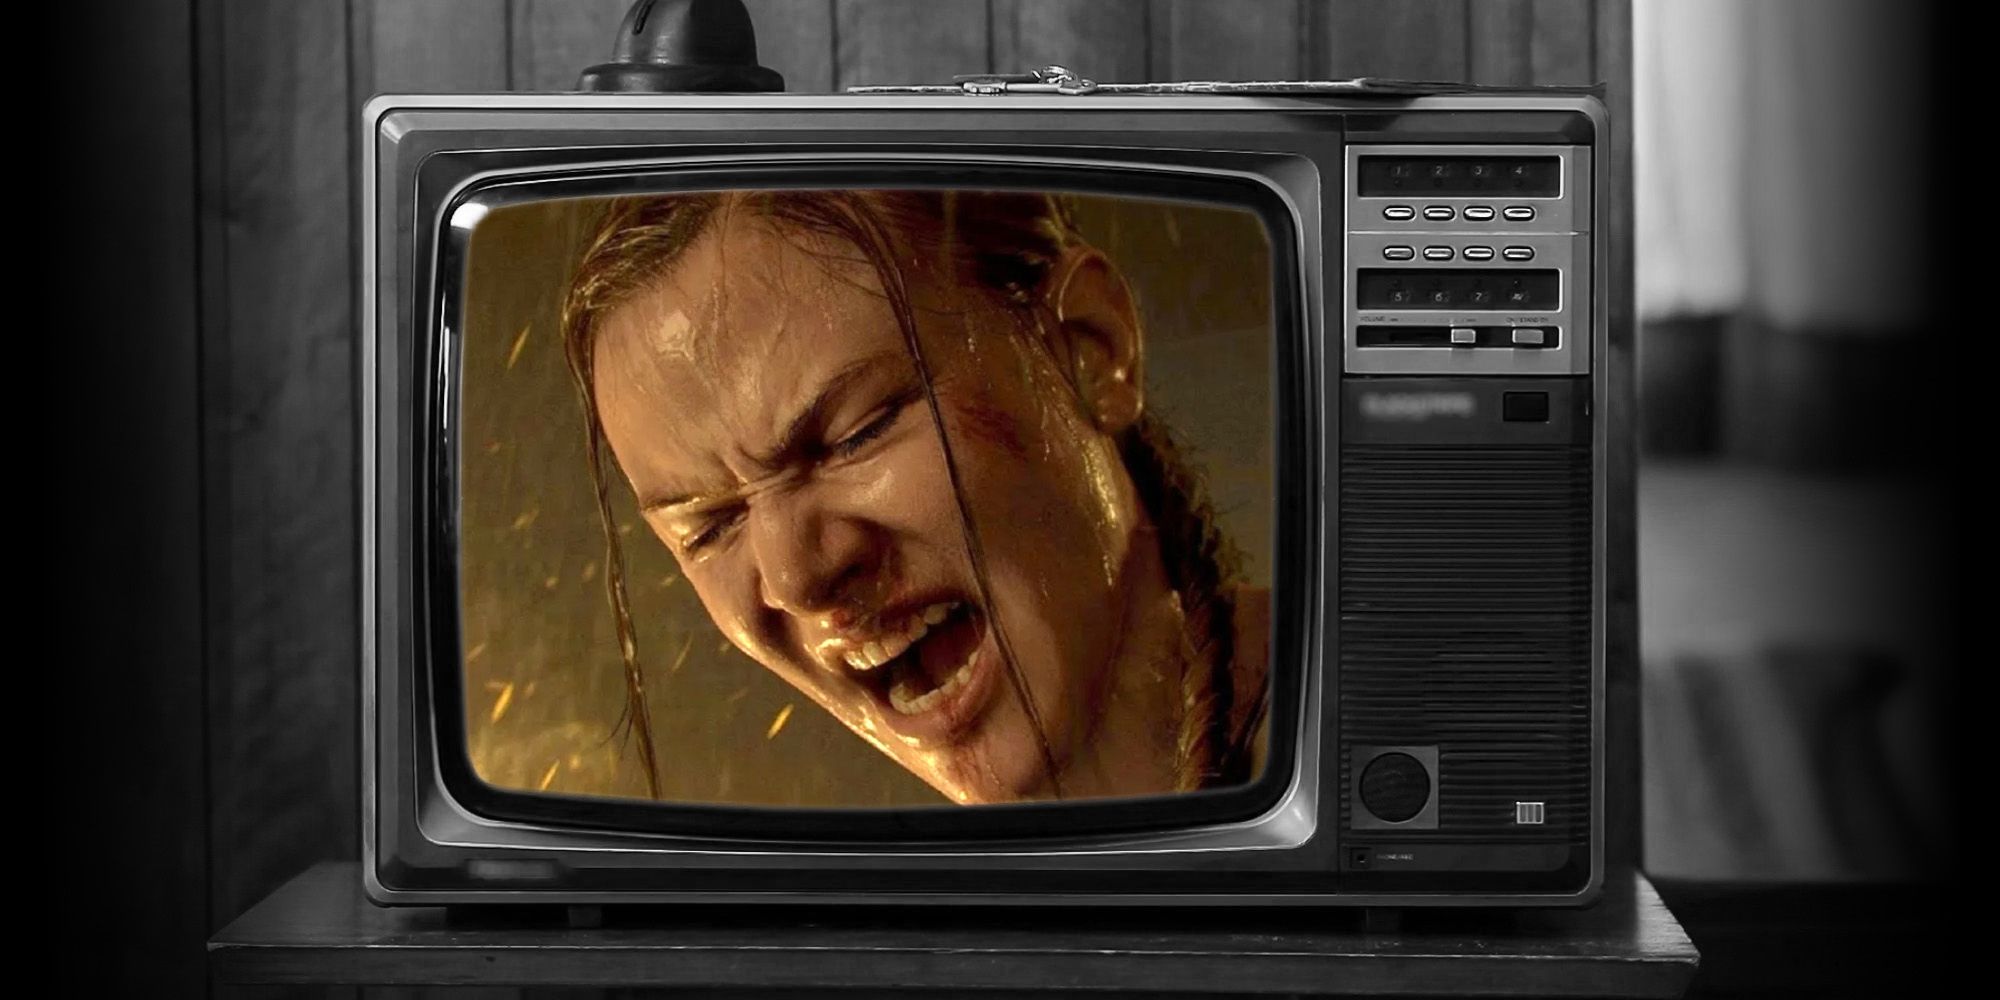 The Last of Us 2 on a CRT TV